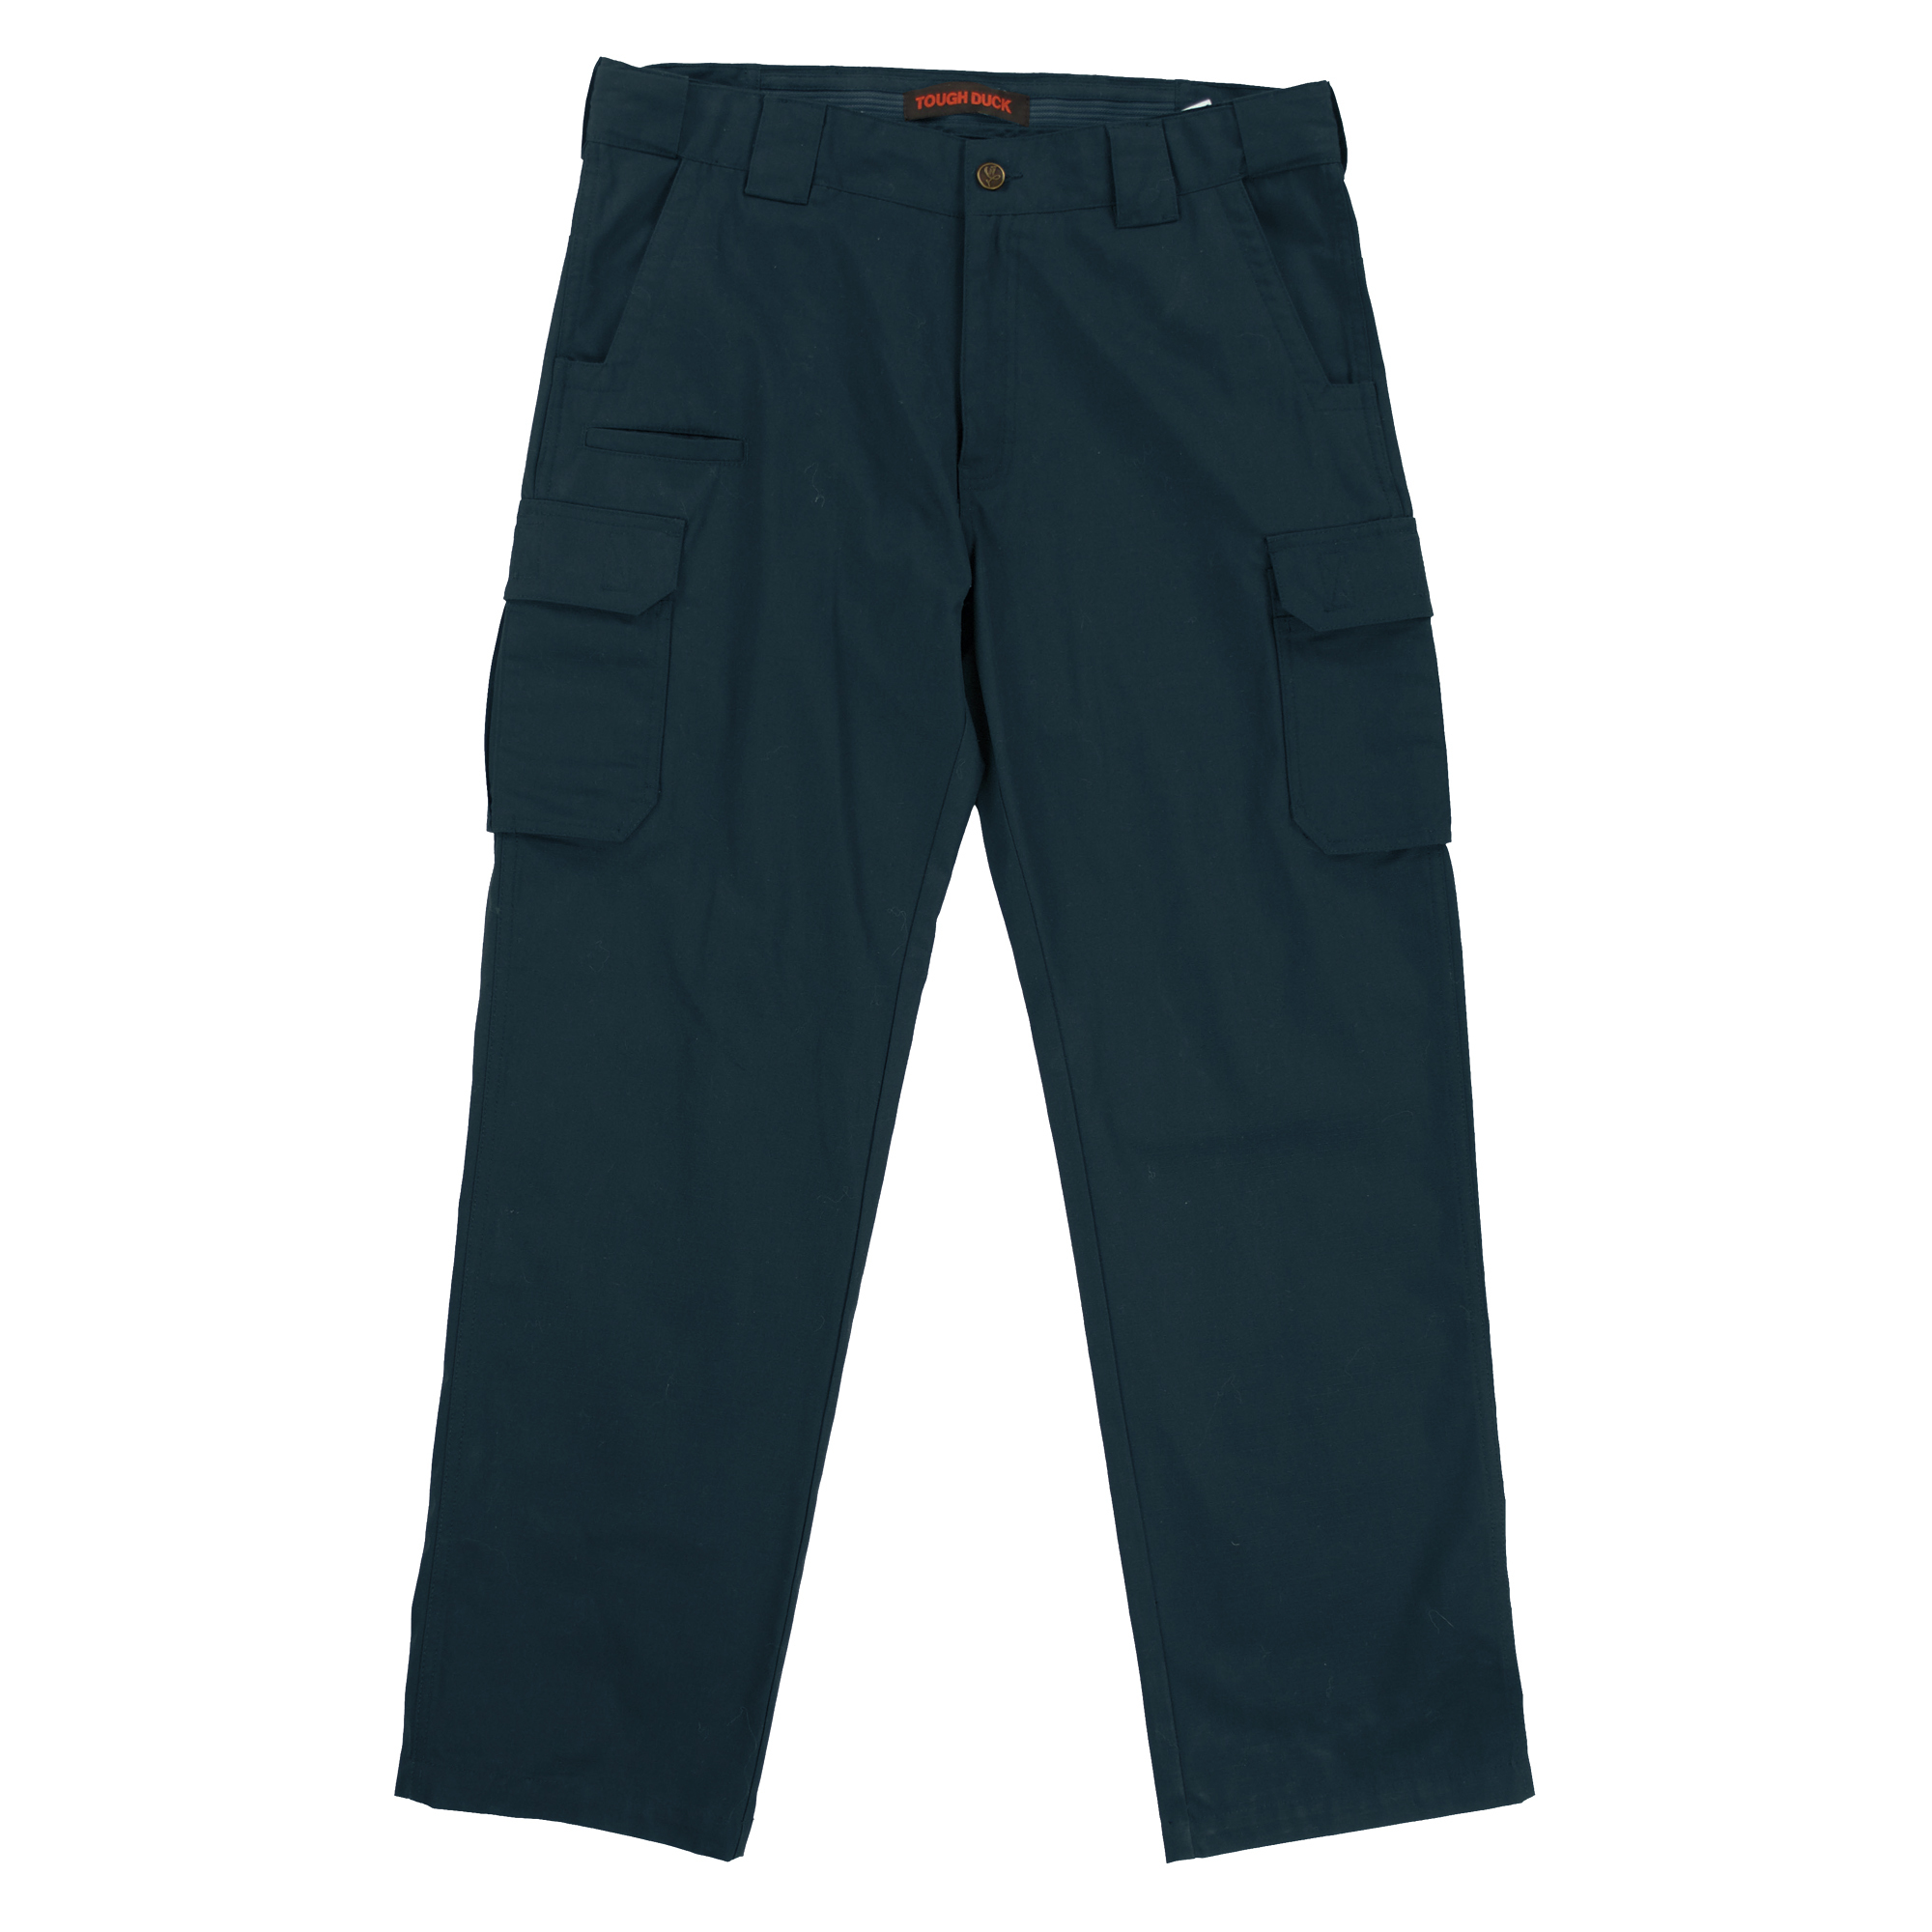 Tough Duck, Ripstop Cargo Pant, Waist 44 in, Inseam 32 in, Color Navy, Model WP111